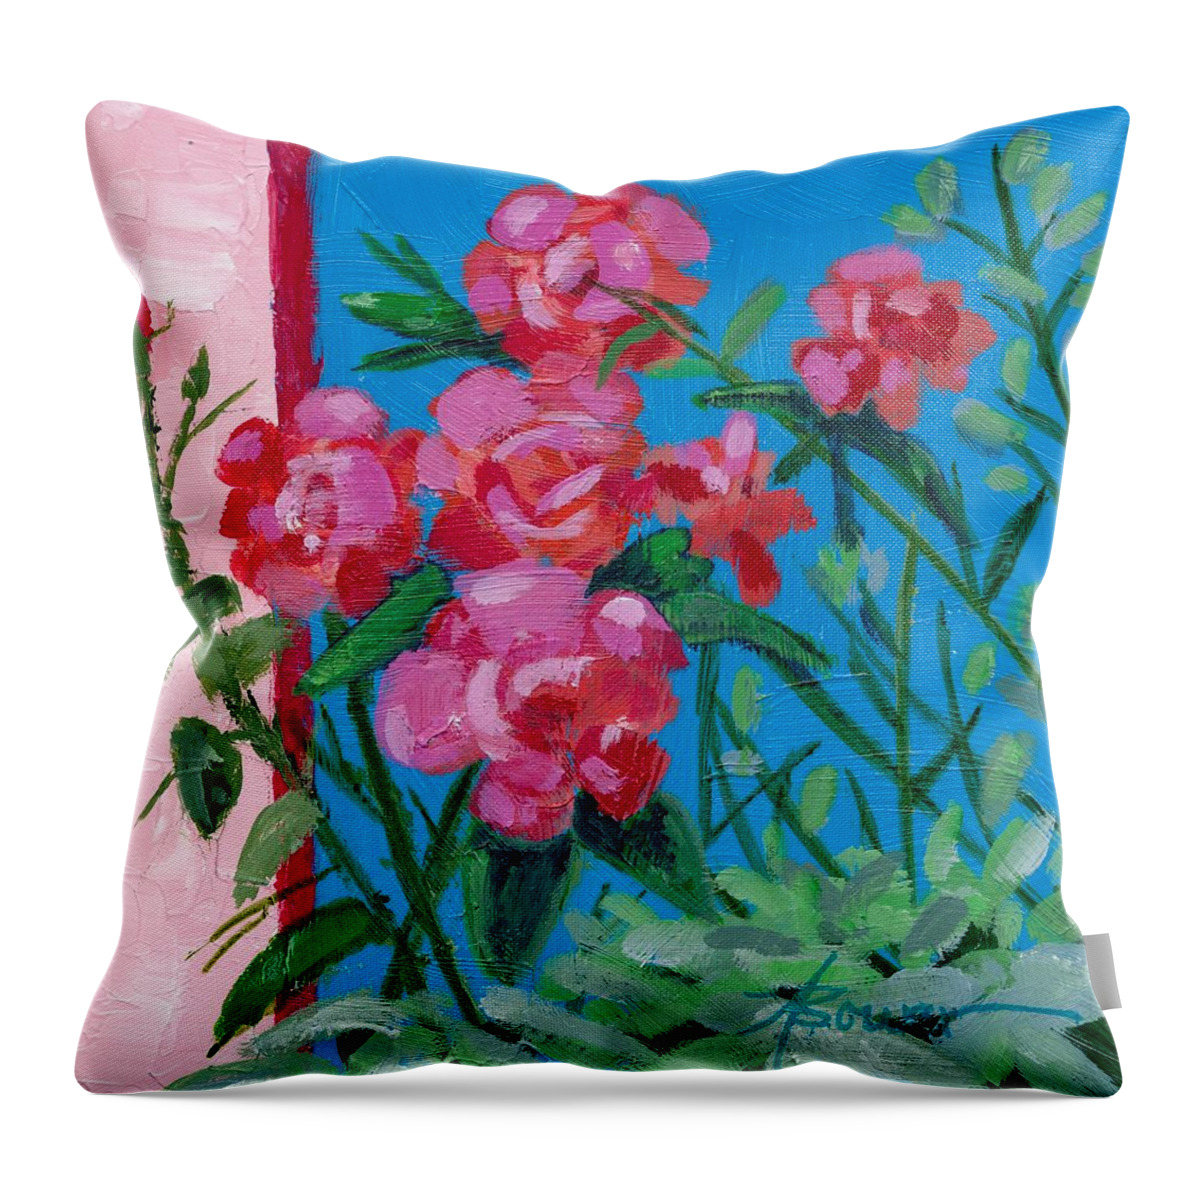 Flowers Throw Pillow featuring the painting Ioannina Garden by Adele Bower